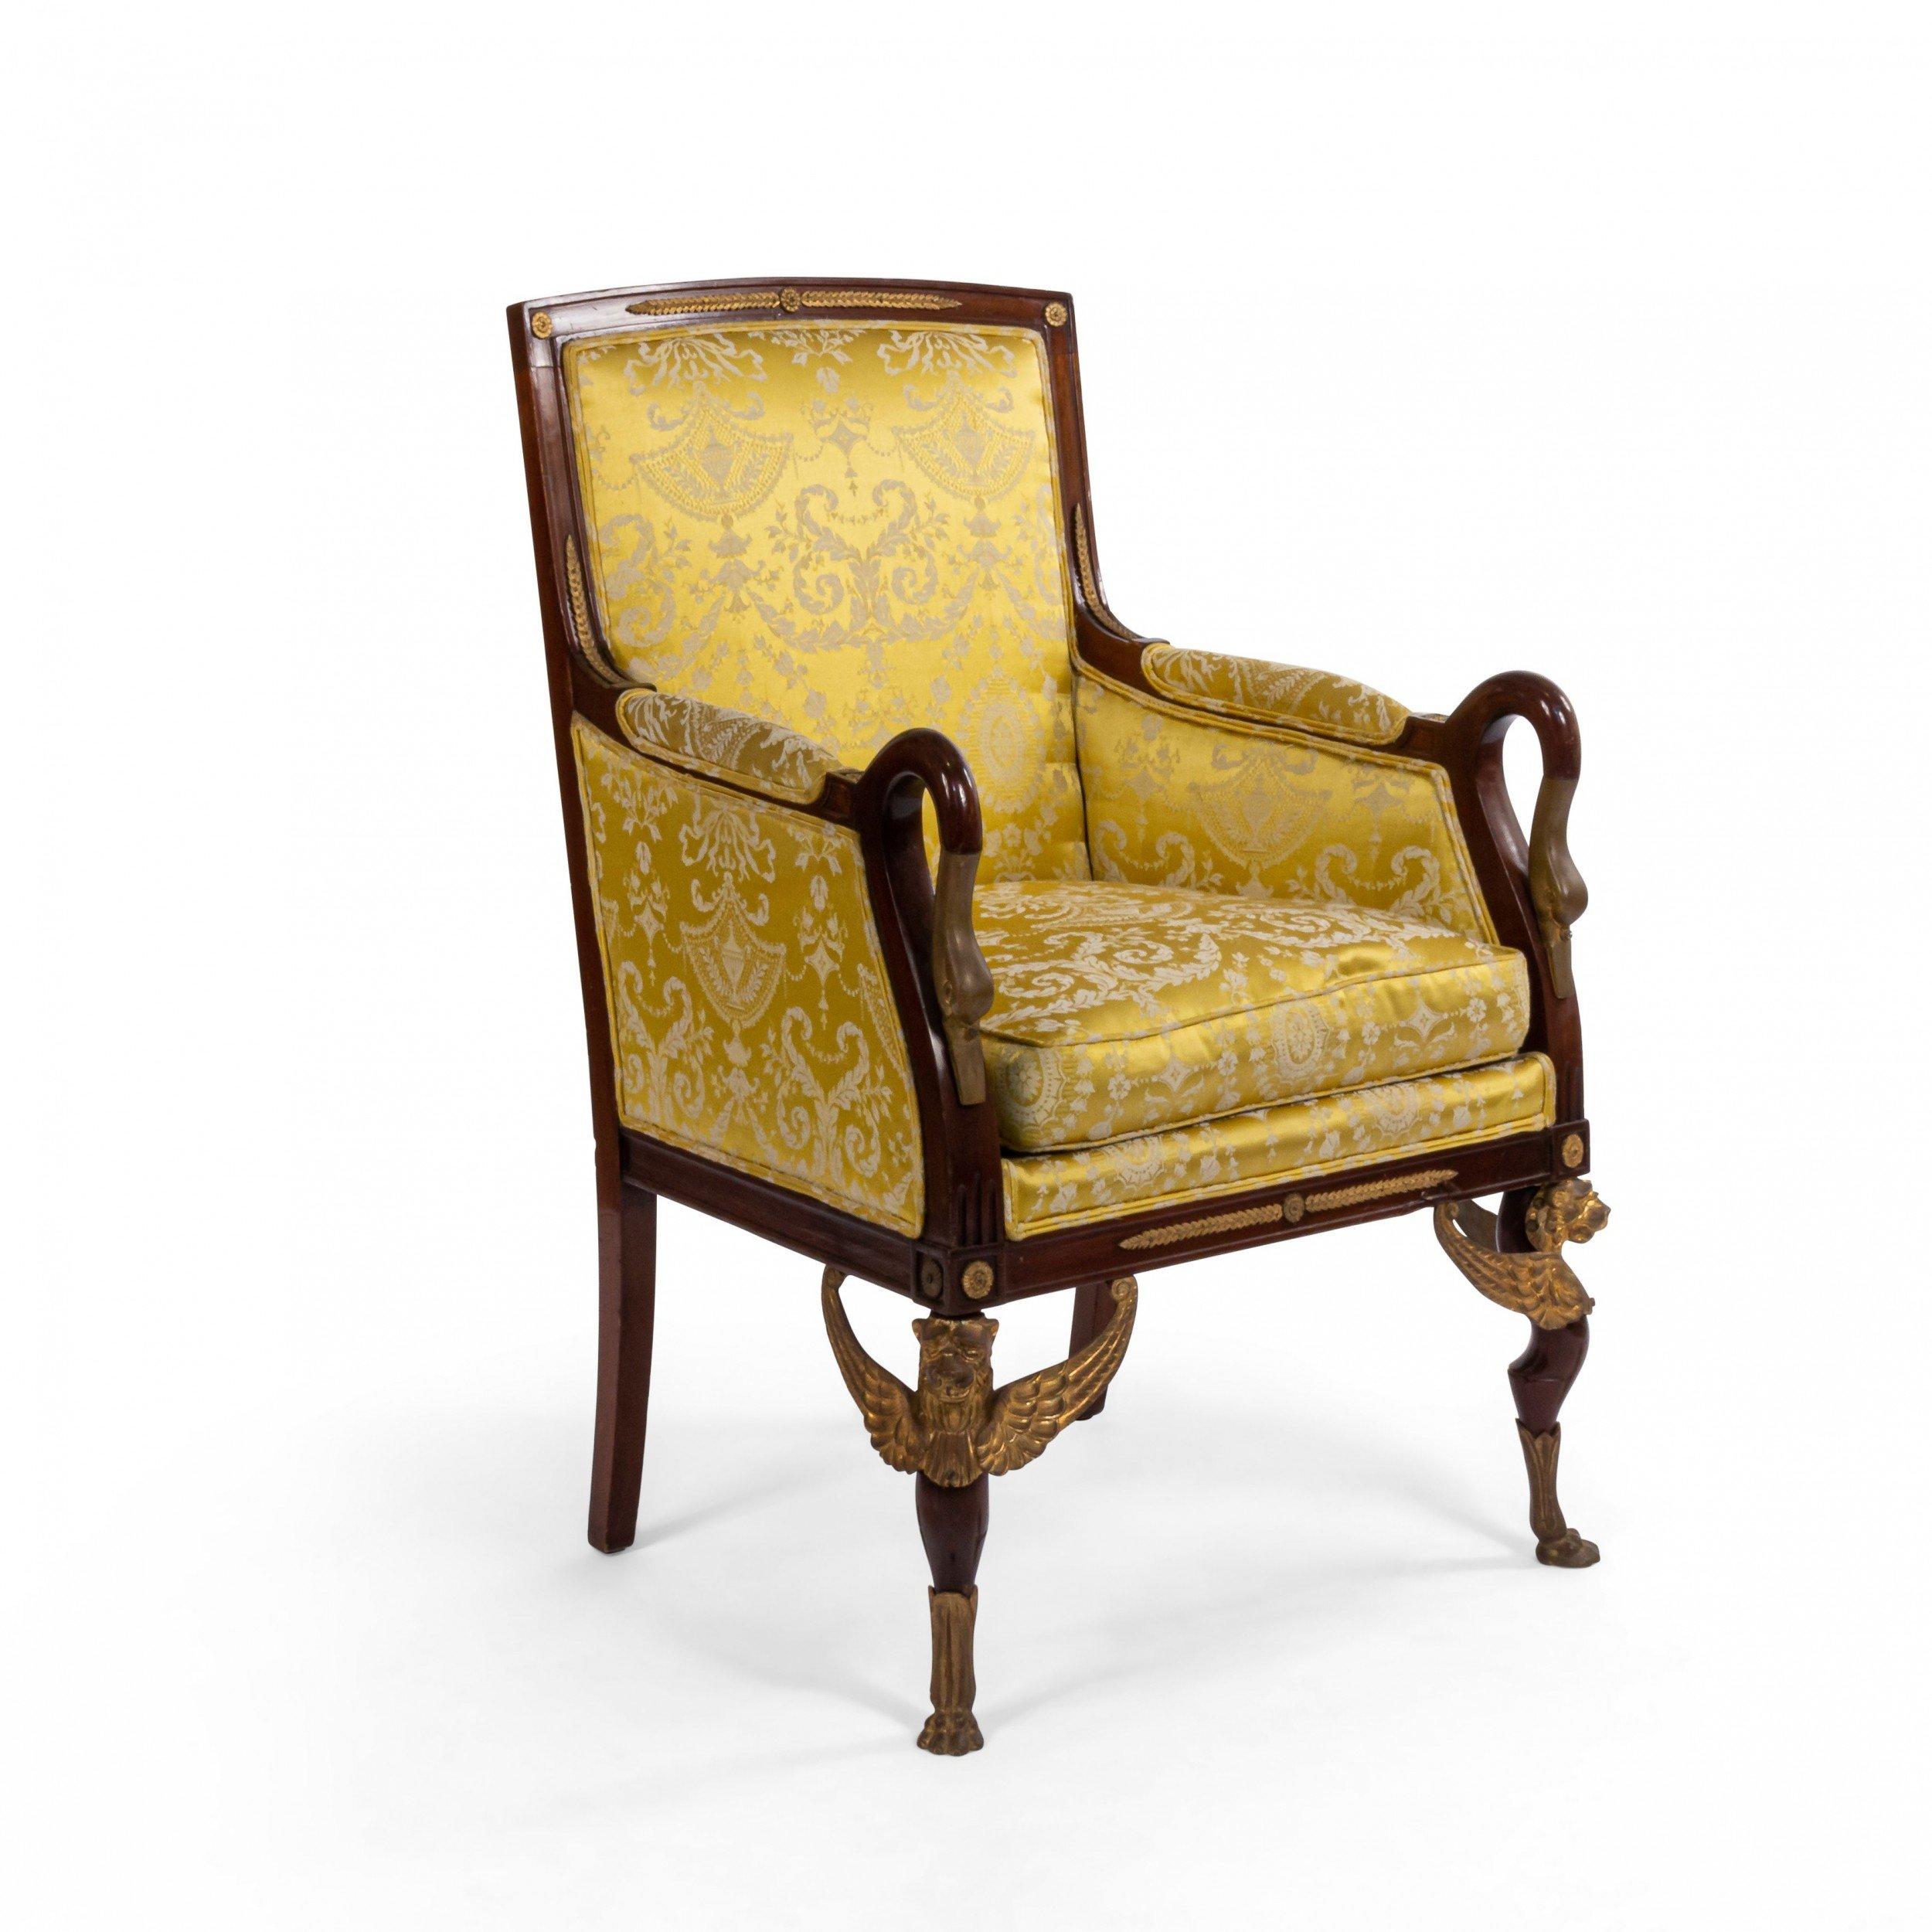 Pair of French Empire style (19th century) mahogany swan design Bergère armchairs with bronze trim, griffin legs, and gold upholstery.